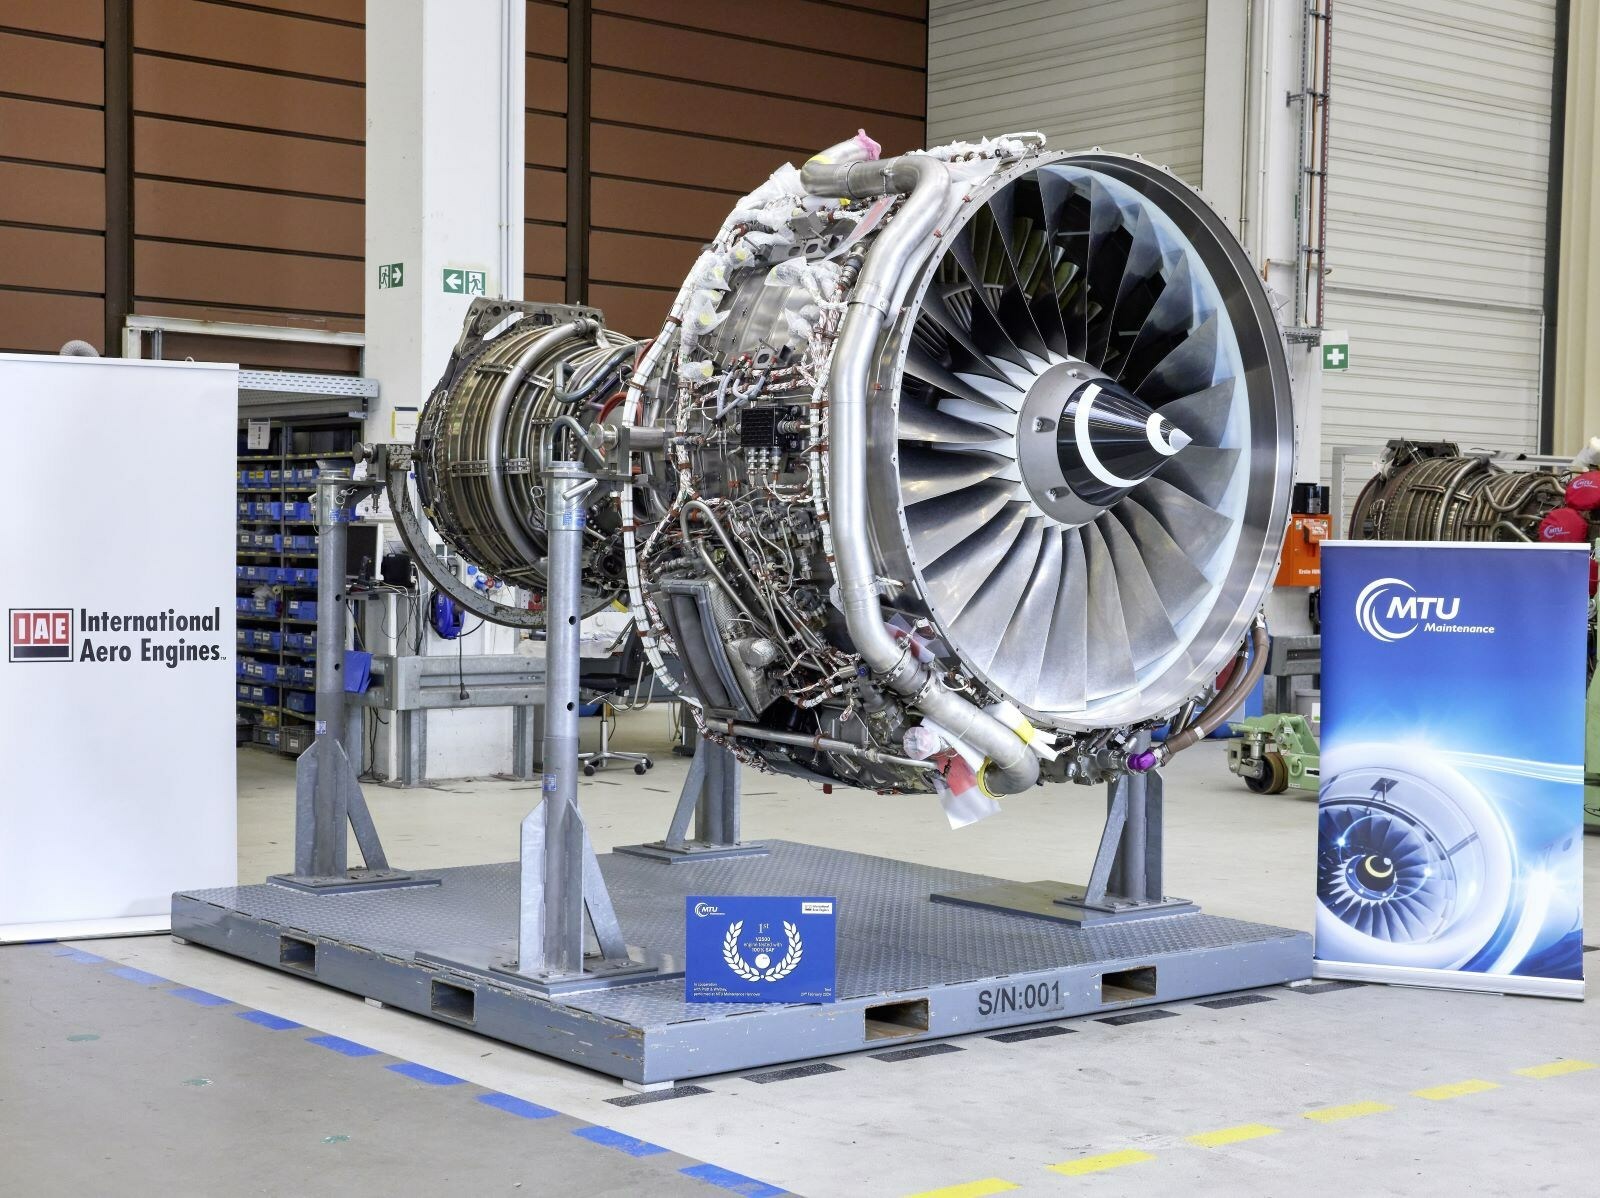 IAE successfully tests V2500 engine with 100% sustainable aviation fuel